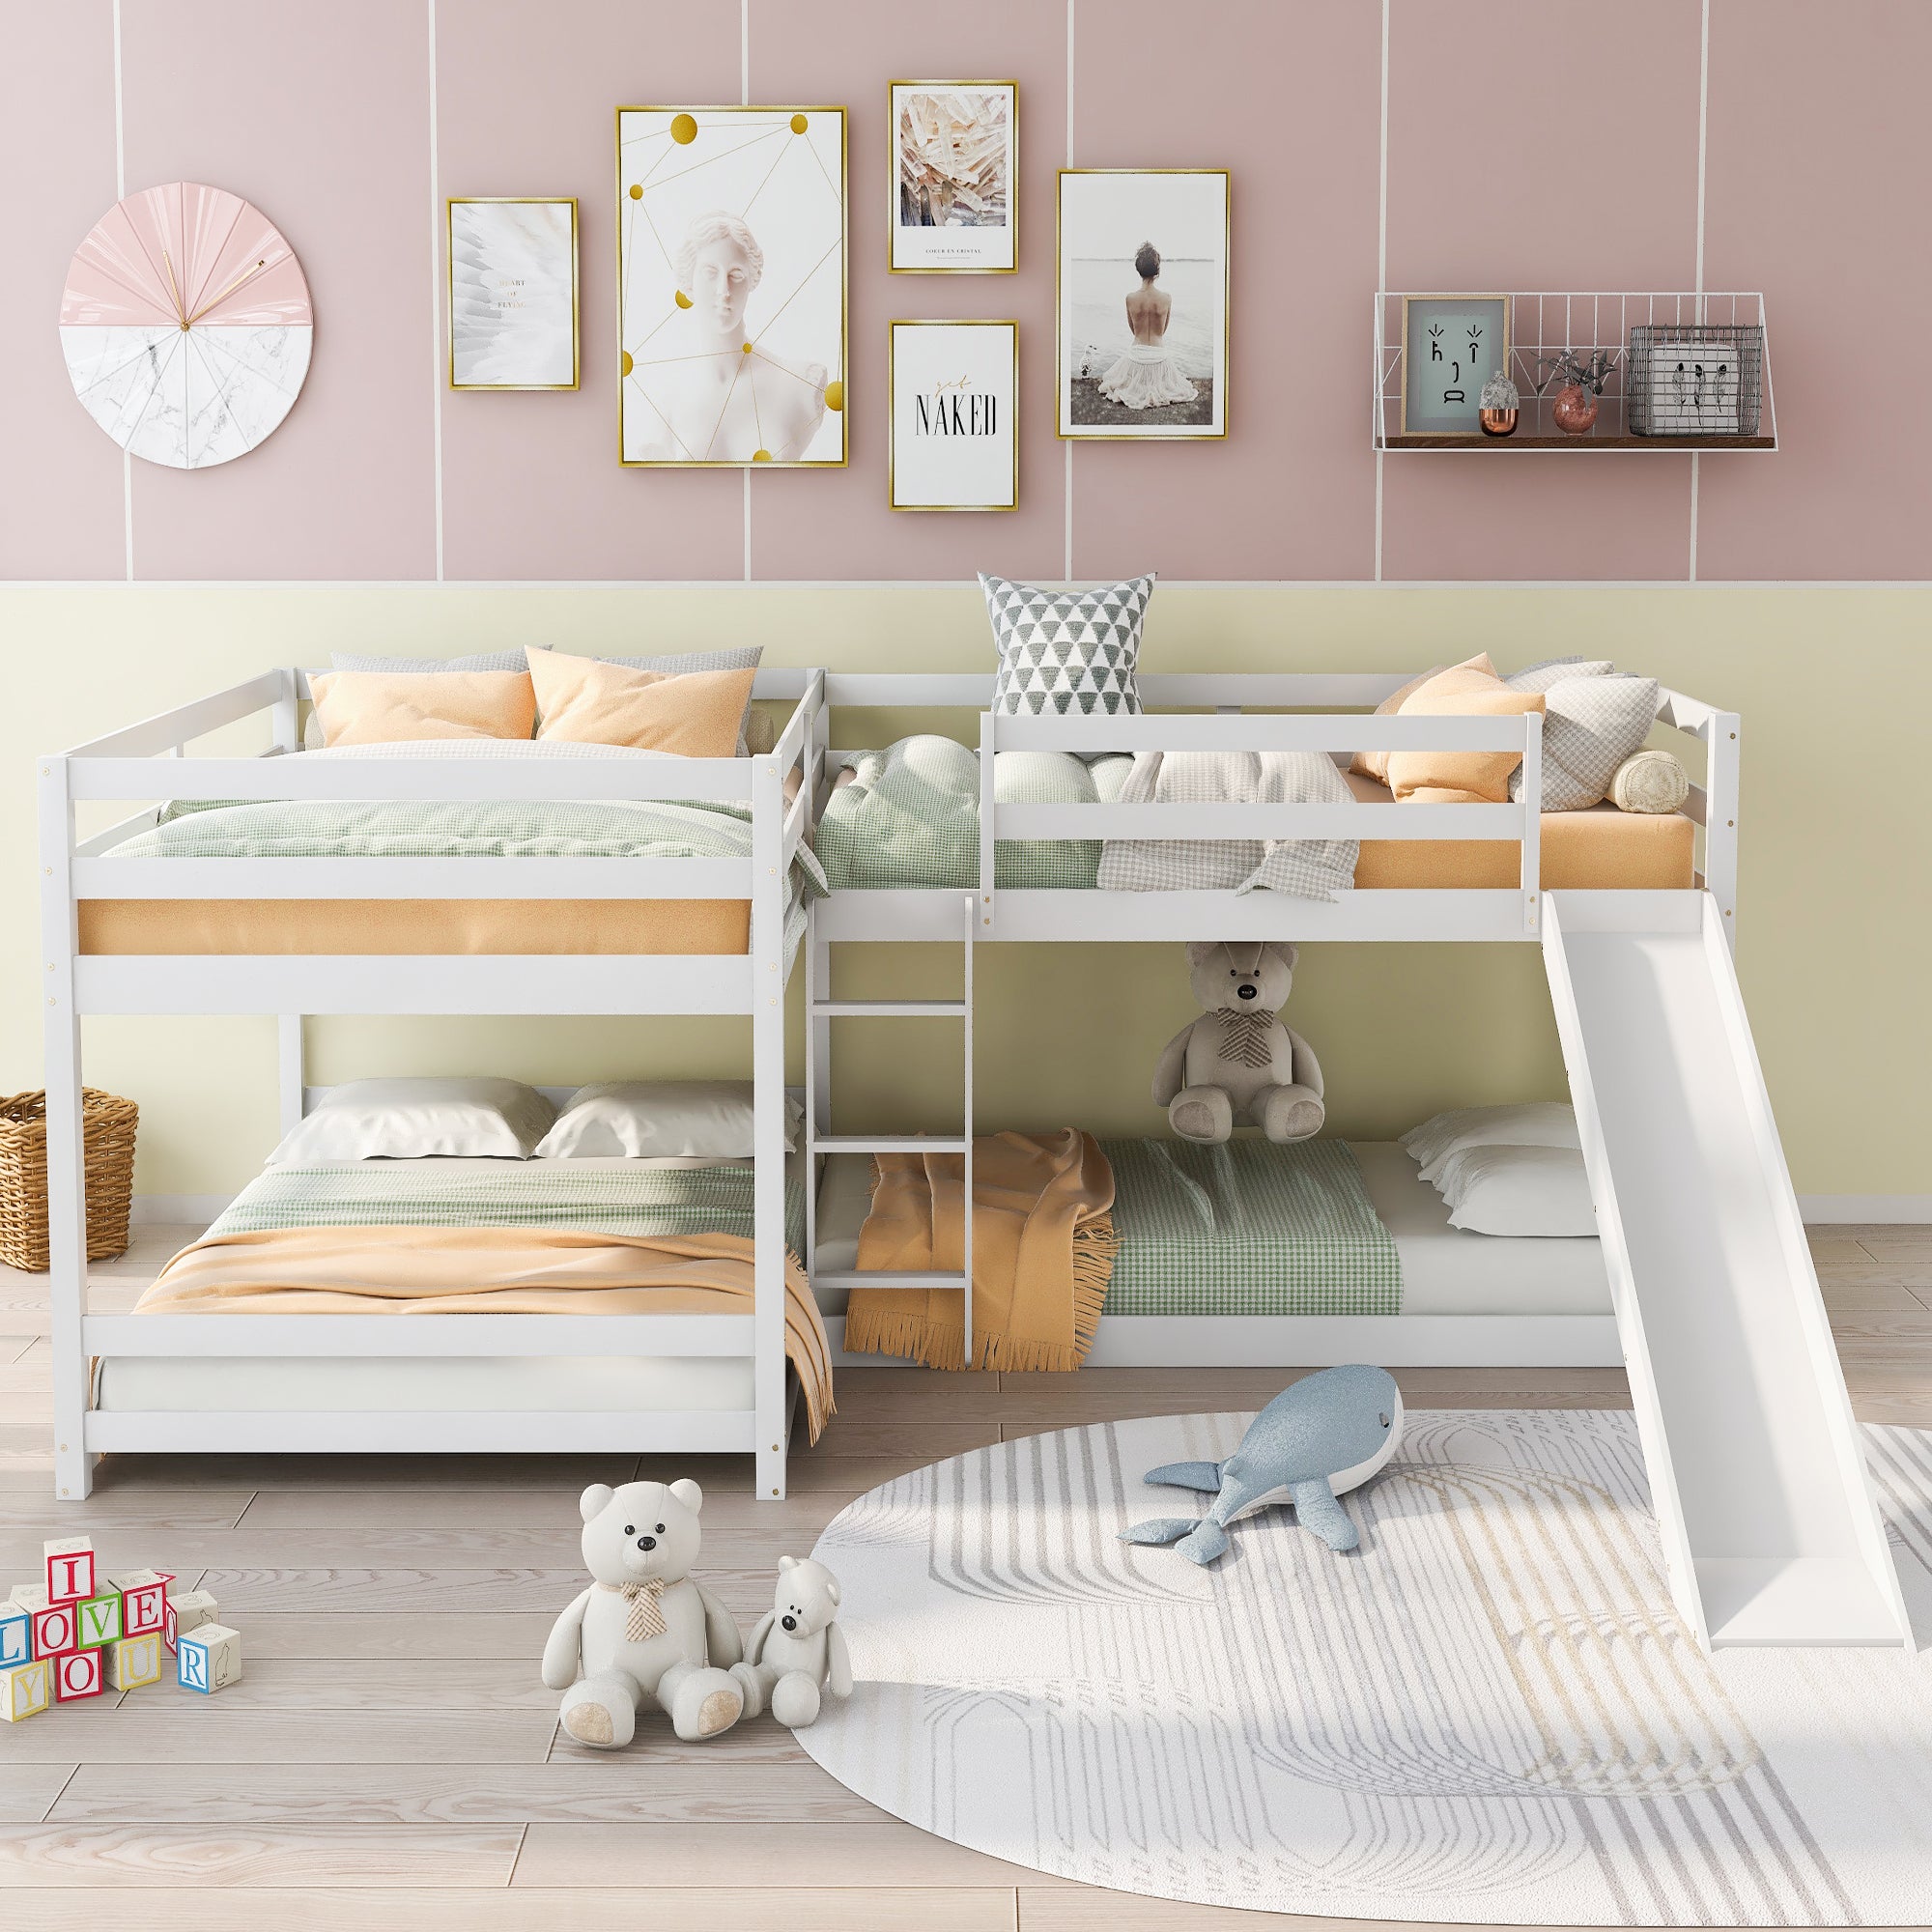 Full and Twin Size L-Shaped Bunk Bed with Slide and Short Ladder (White)